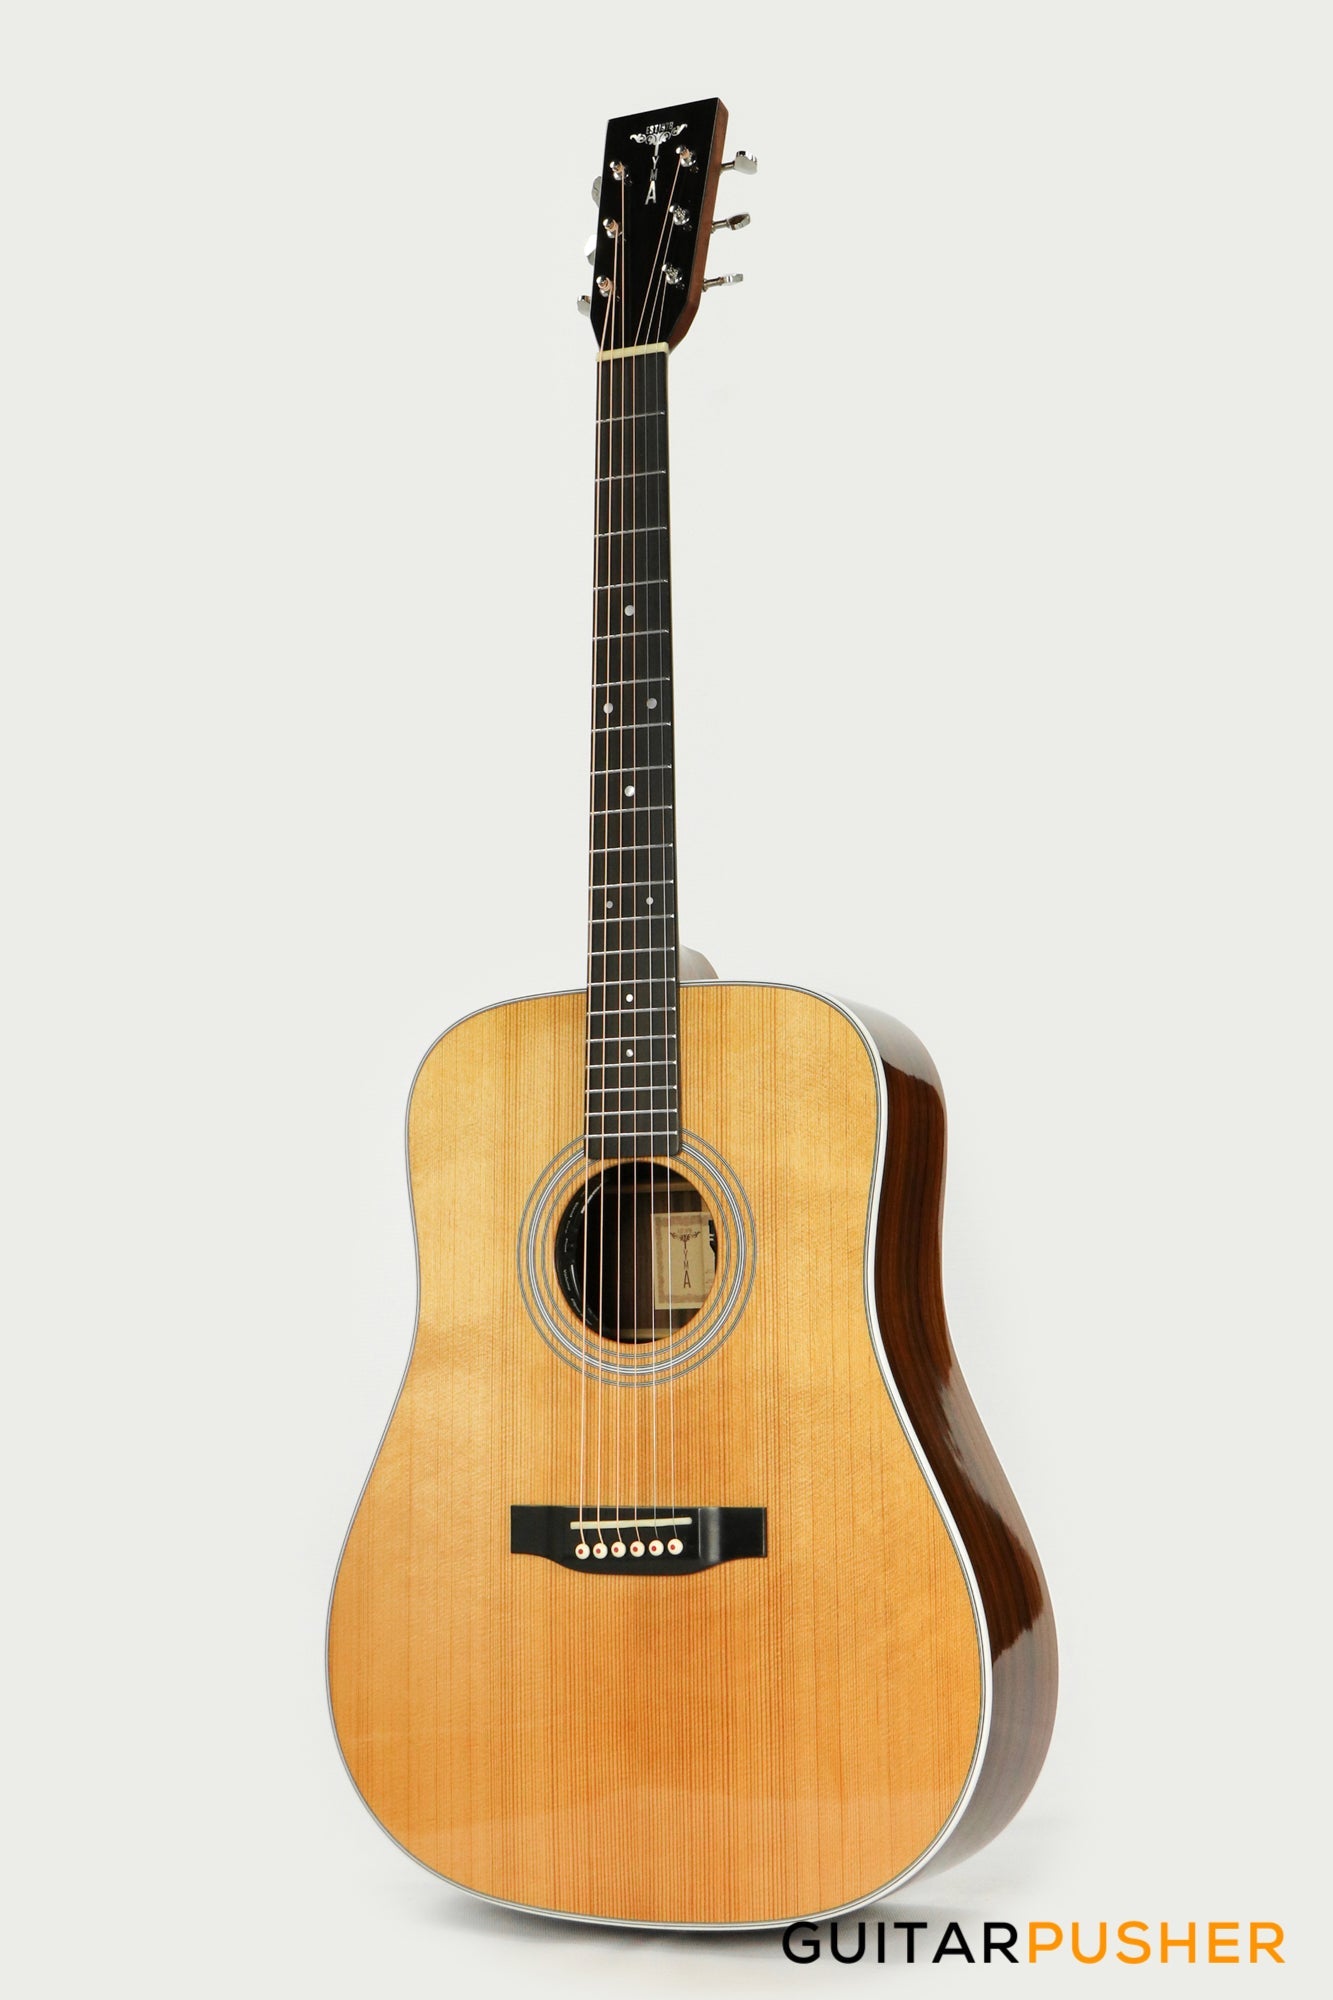 Tyma TD-28E All-Solid Wood Sitka Spruce Top Indian Rosewood Dreadnought Acoustic-Electric Guitar with Fishman Ellipse Matrix Blend Dual Pickups